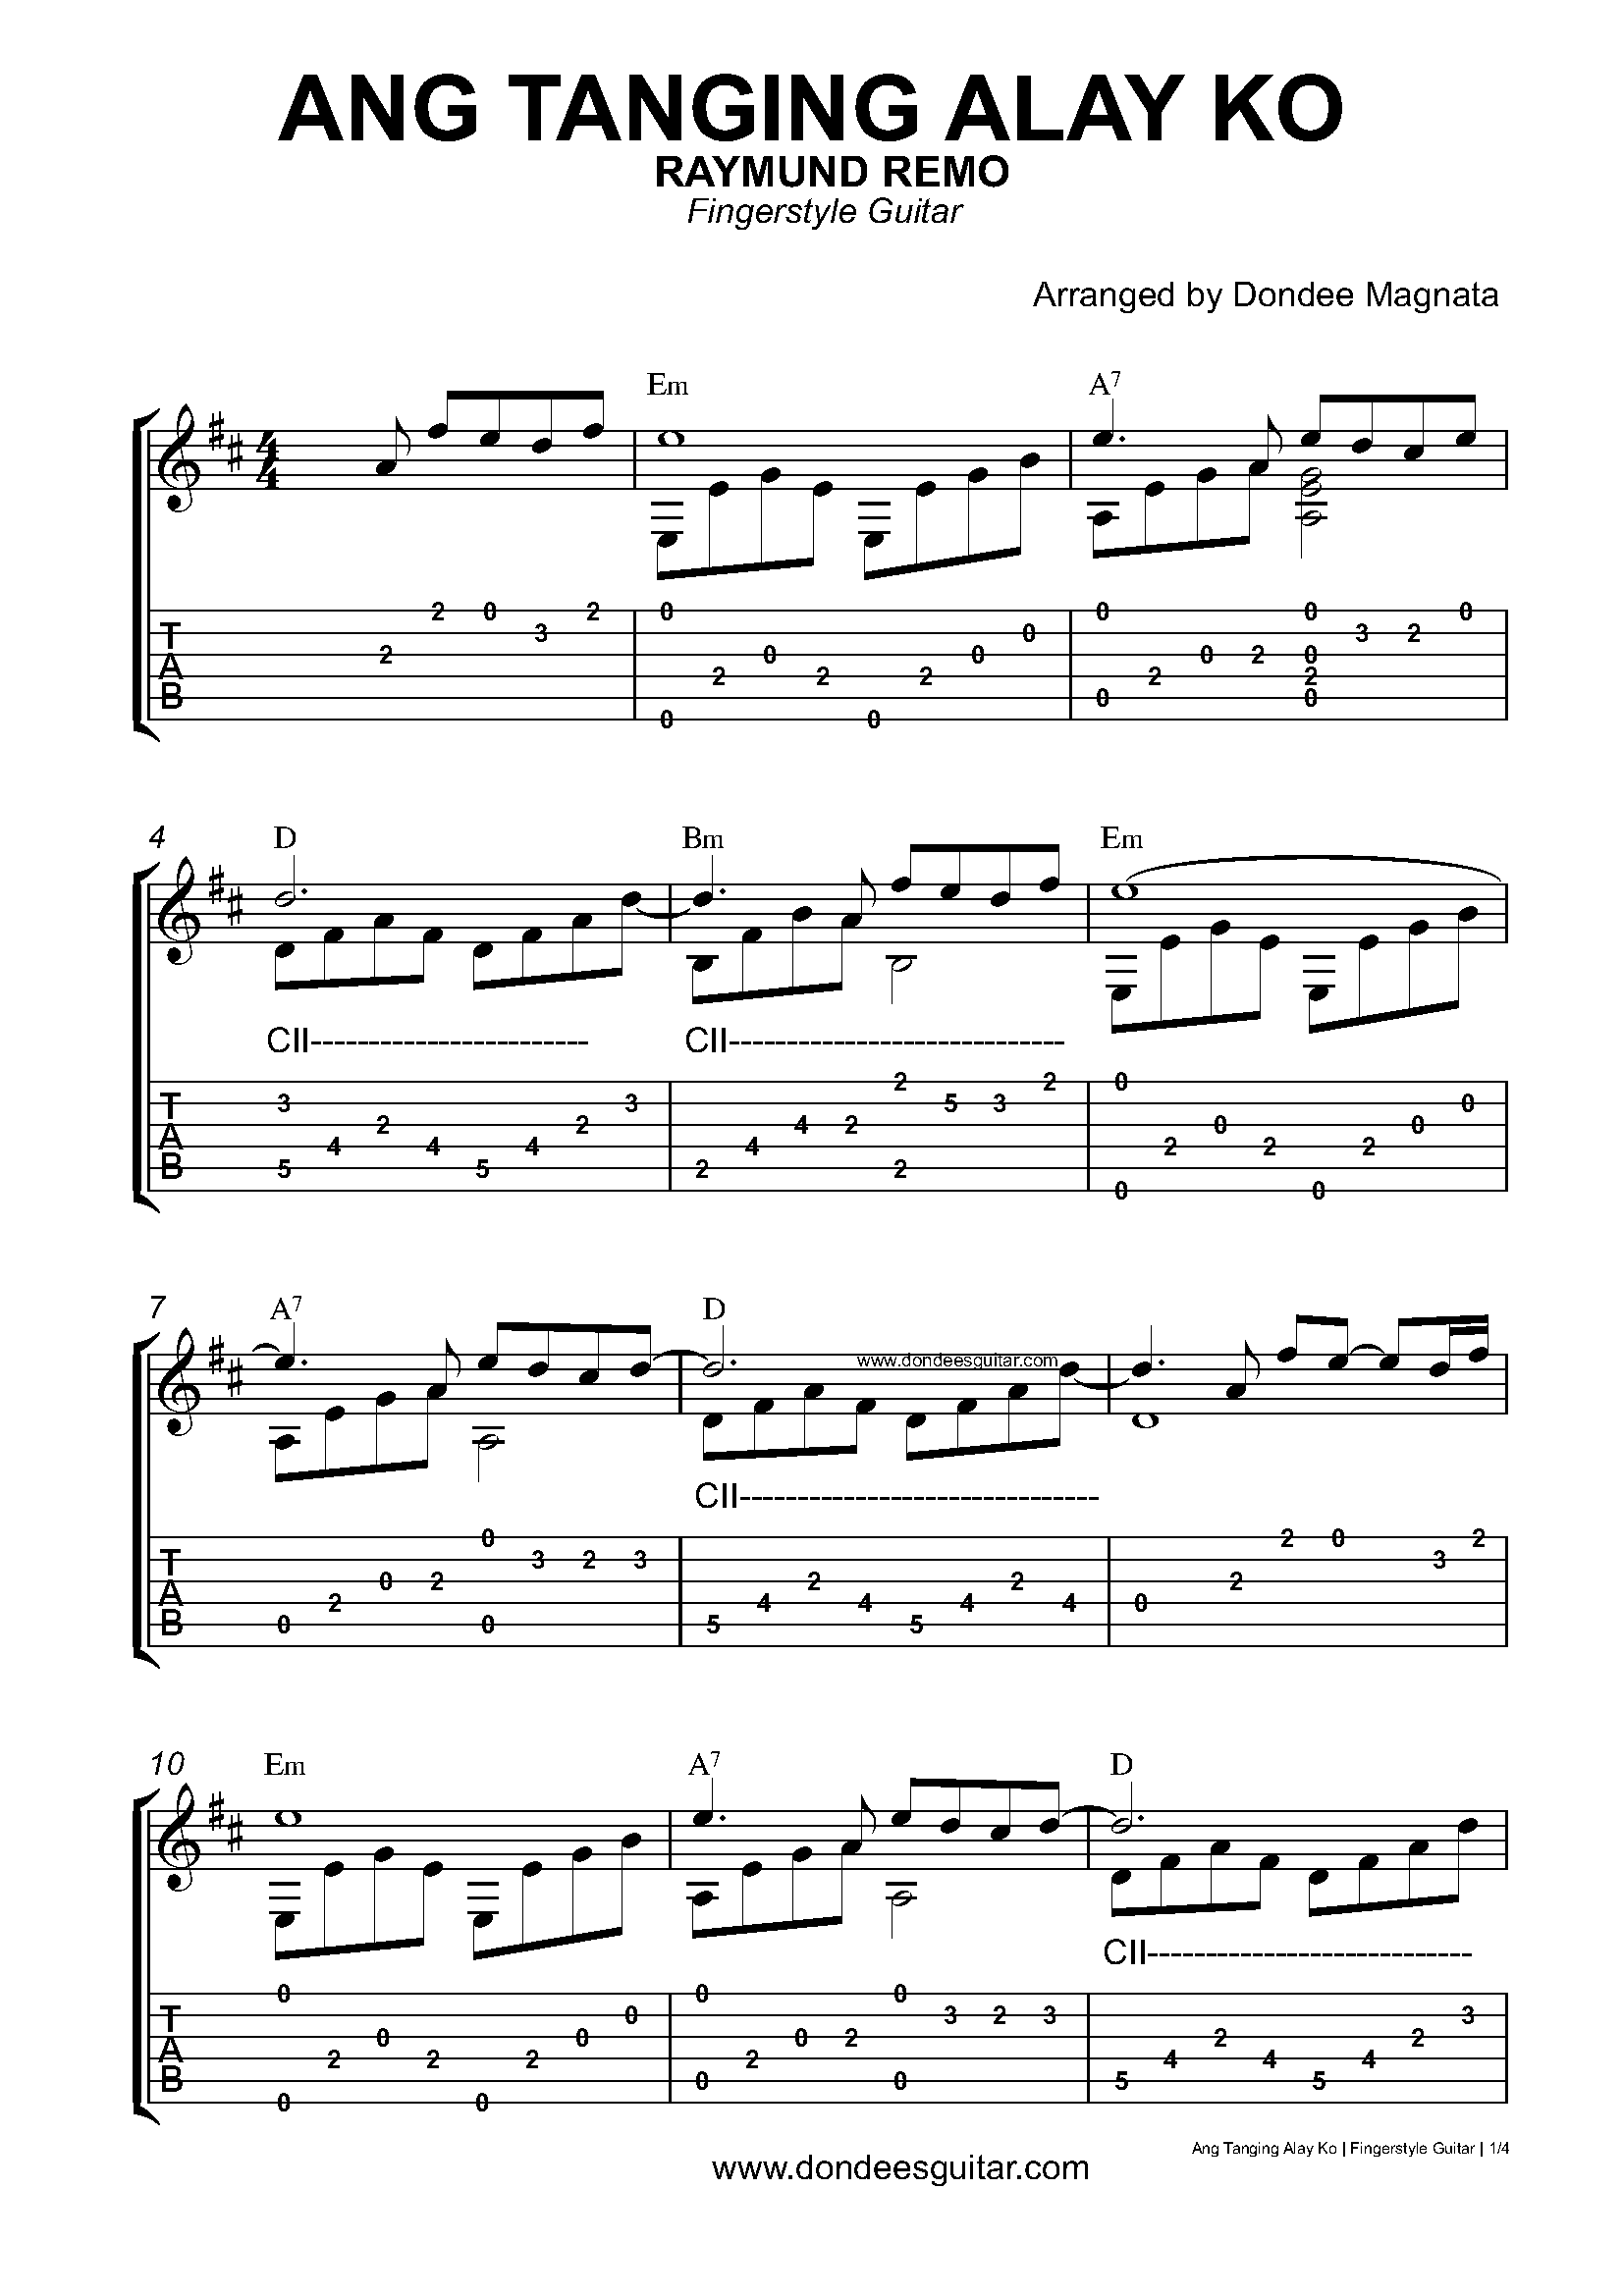 Ang Tanging Alay Ko Fingerstyle Tabs